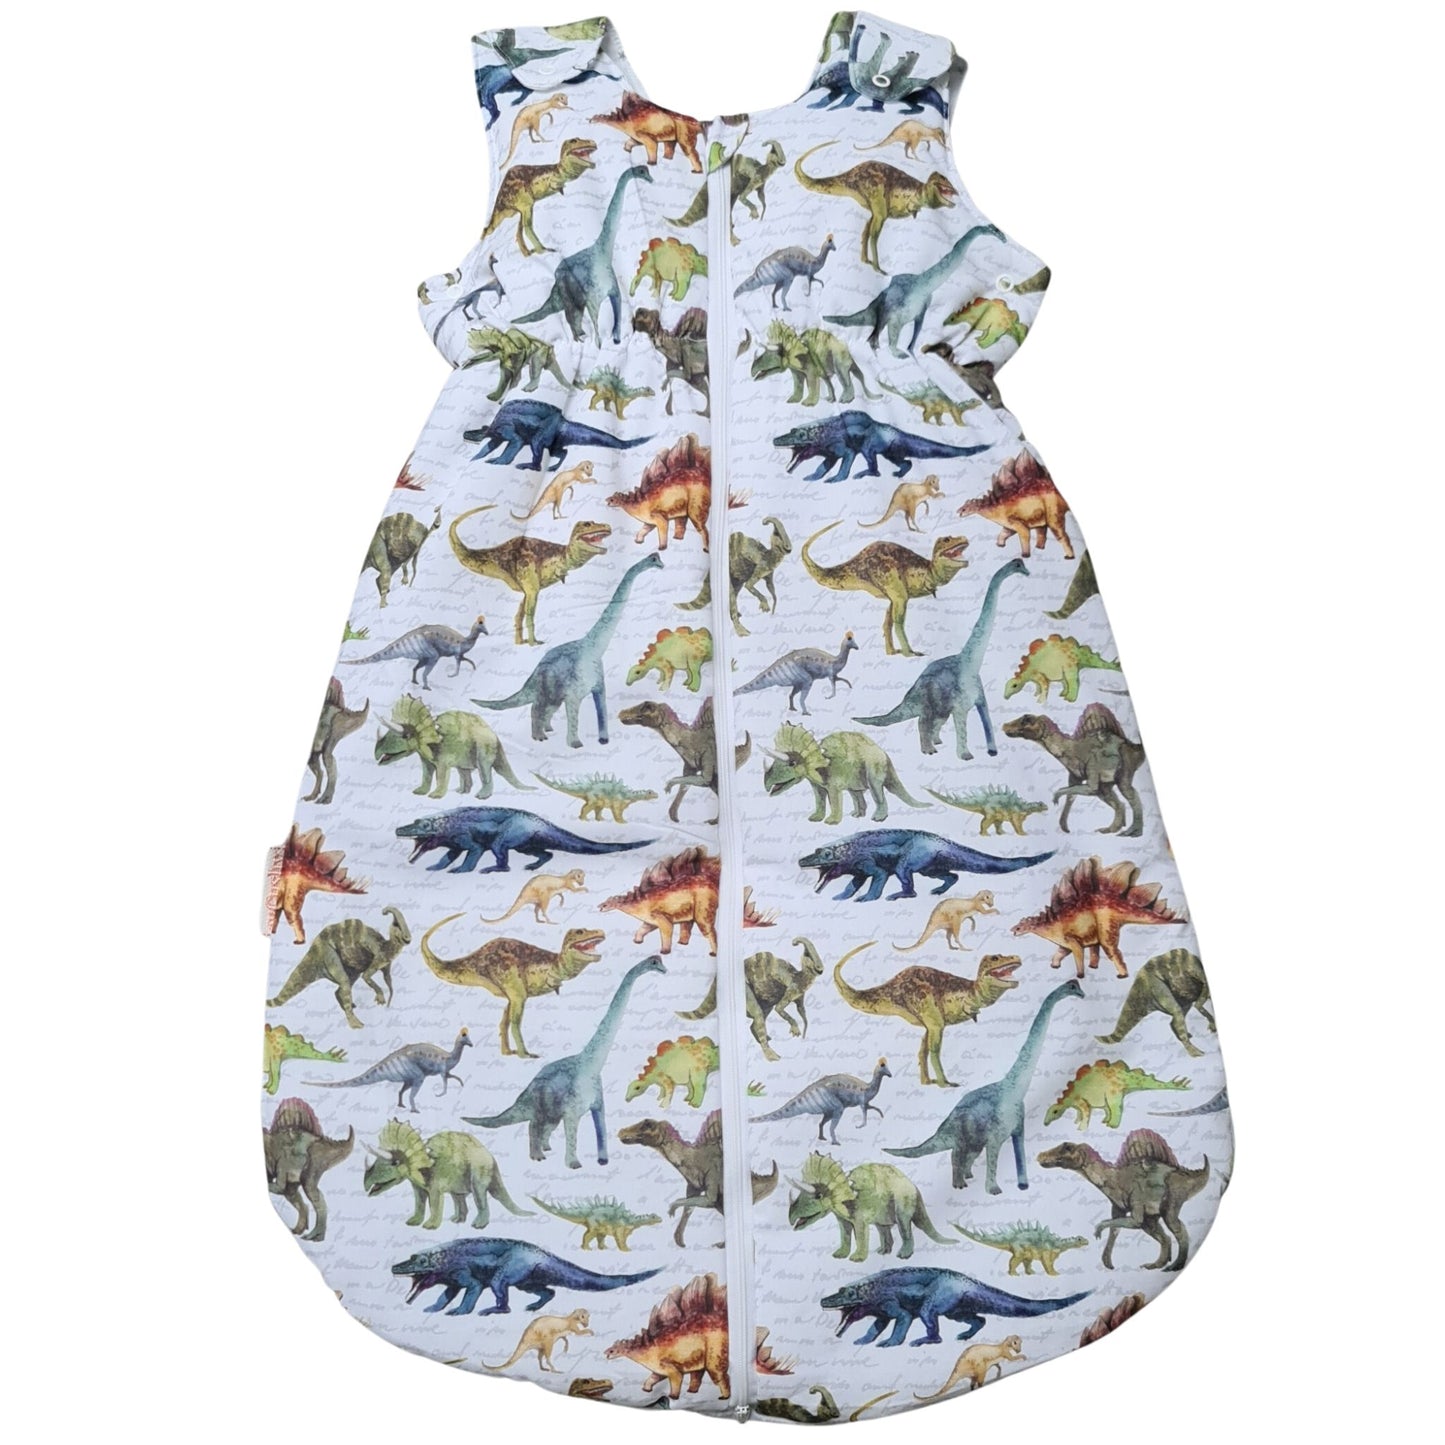 baby sleeping bag dinosaurs 0-12 months cotton breathable